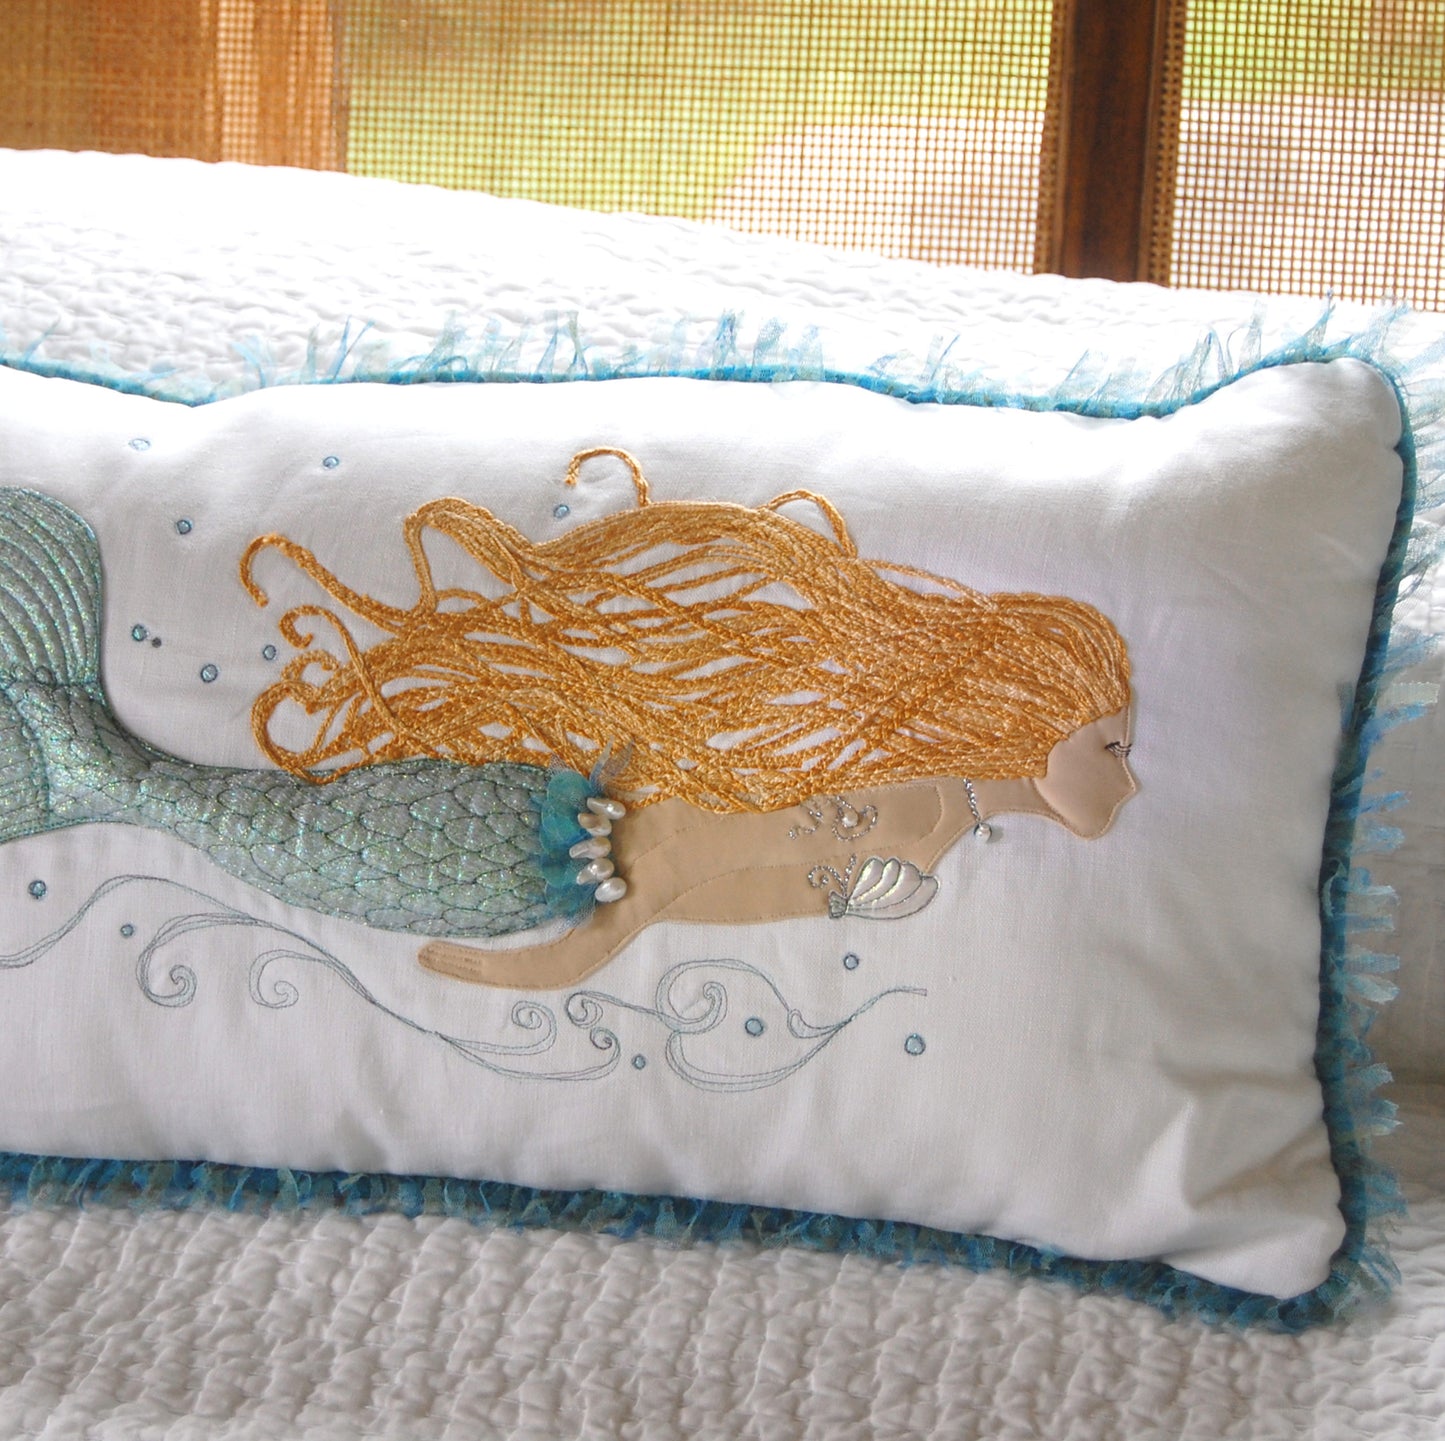 Pearl of the Sea Mermaid Lumbar Pillow styled on a bed.